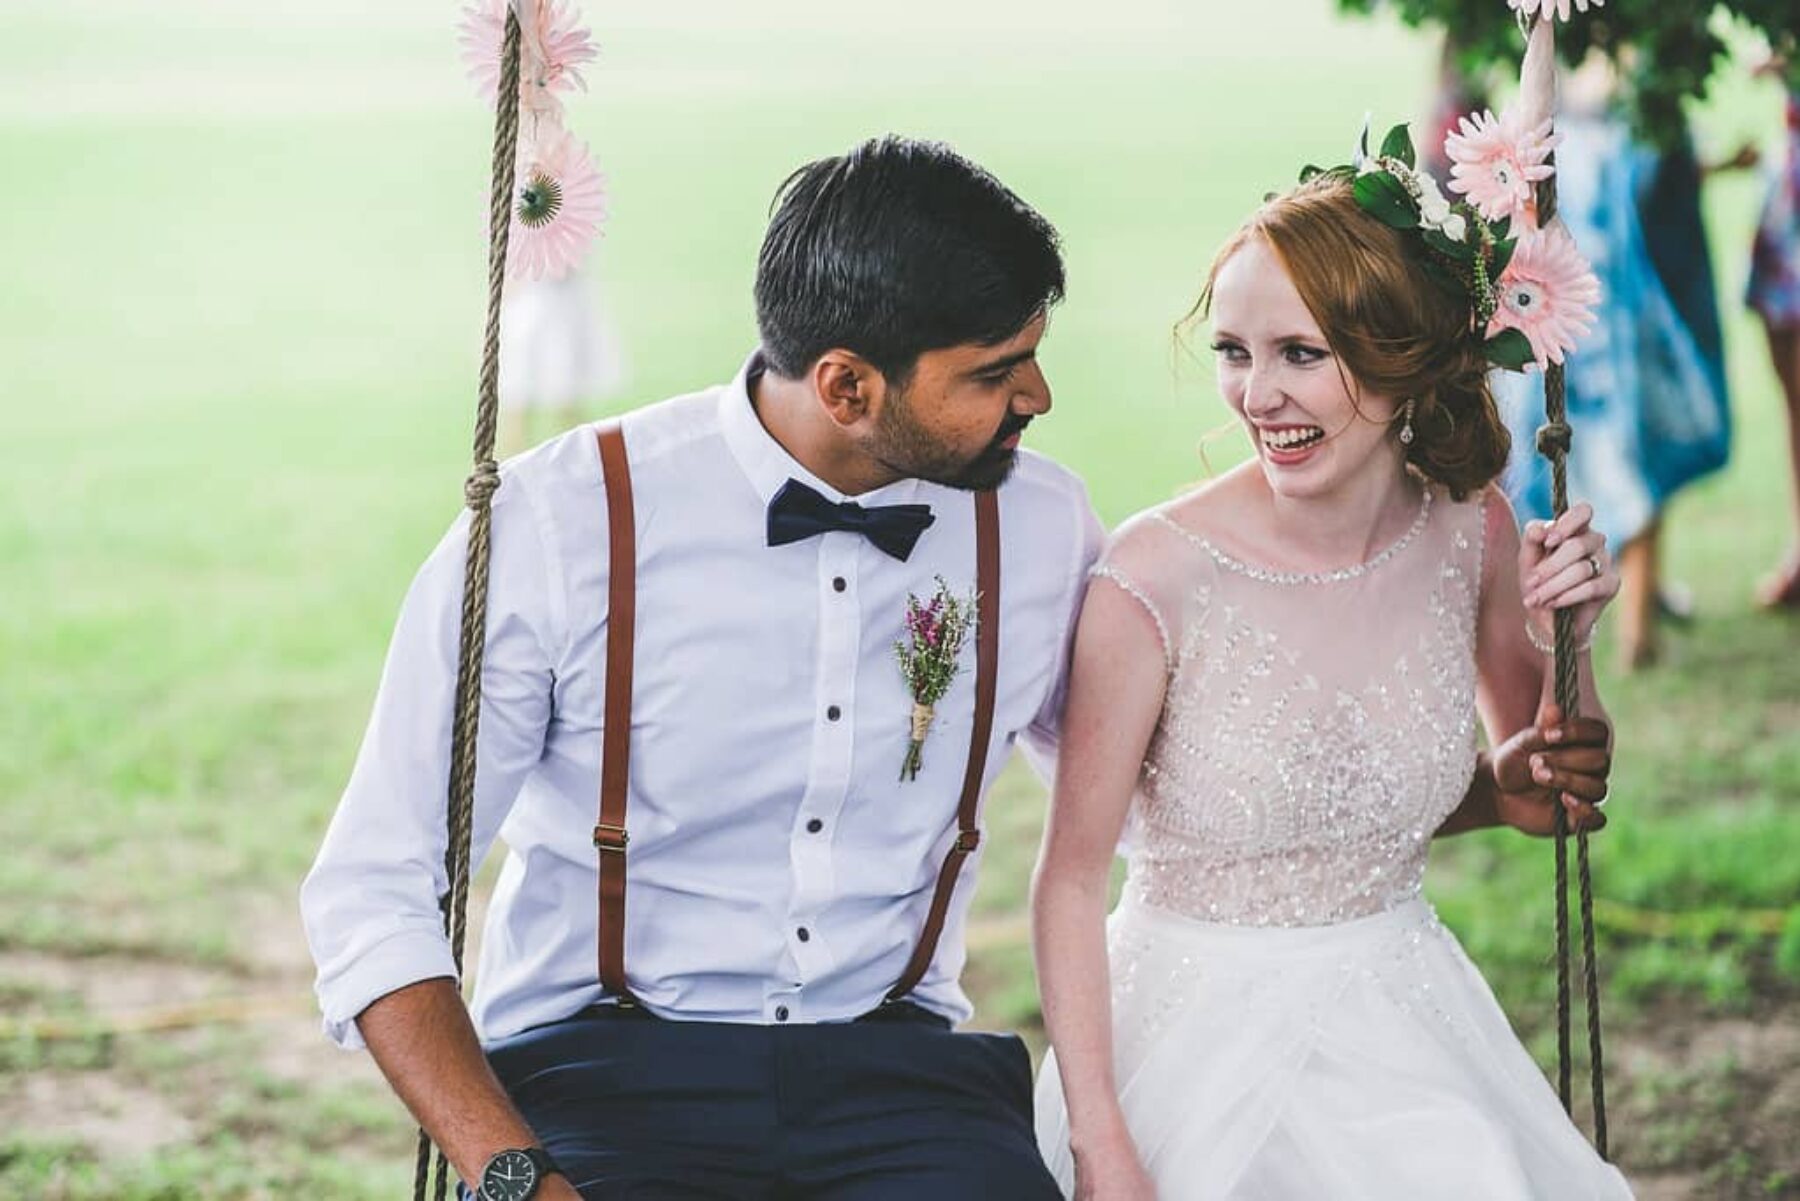 Rustic barn wedding at the Sydney Polo Club | Photography by Athena Grace